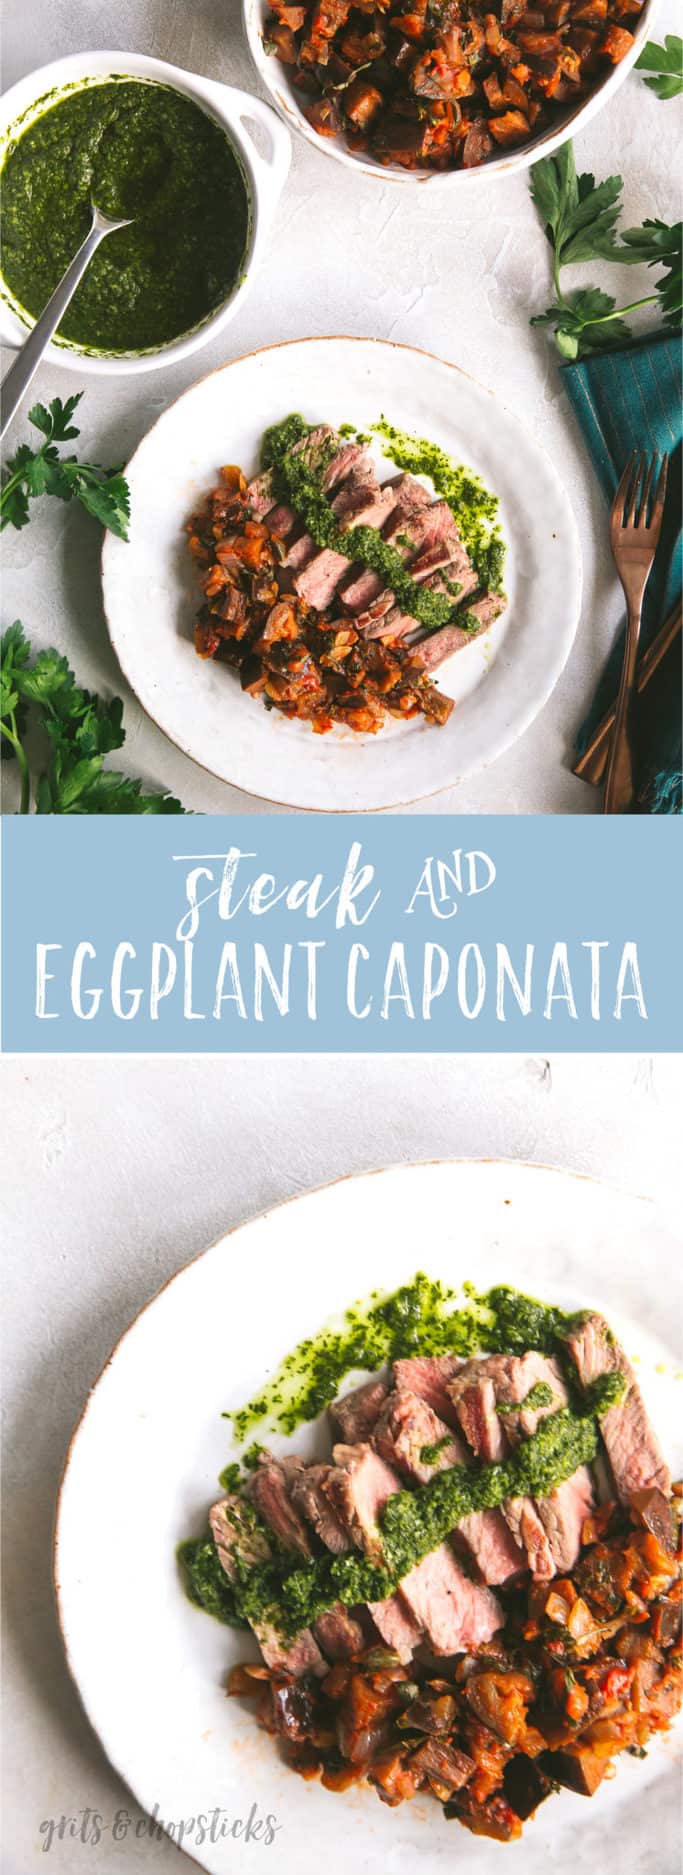 Try this steak and eggplant caponata for your next easy dinner; as an added bonus, it's Whole30/paleo!